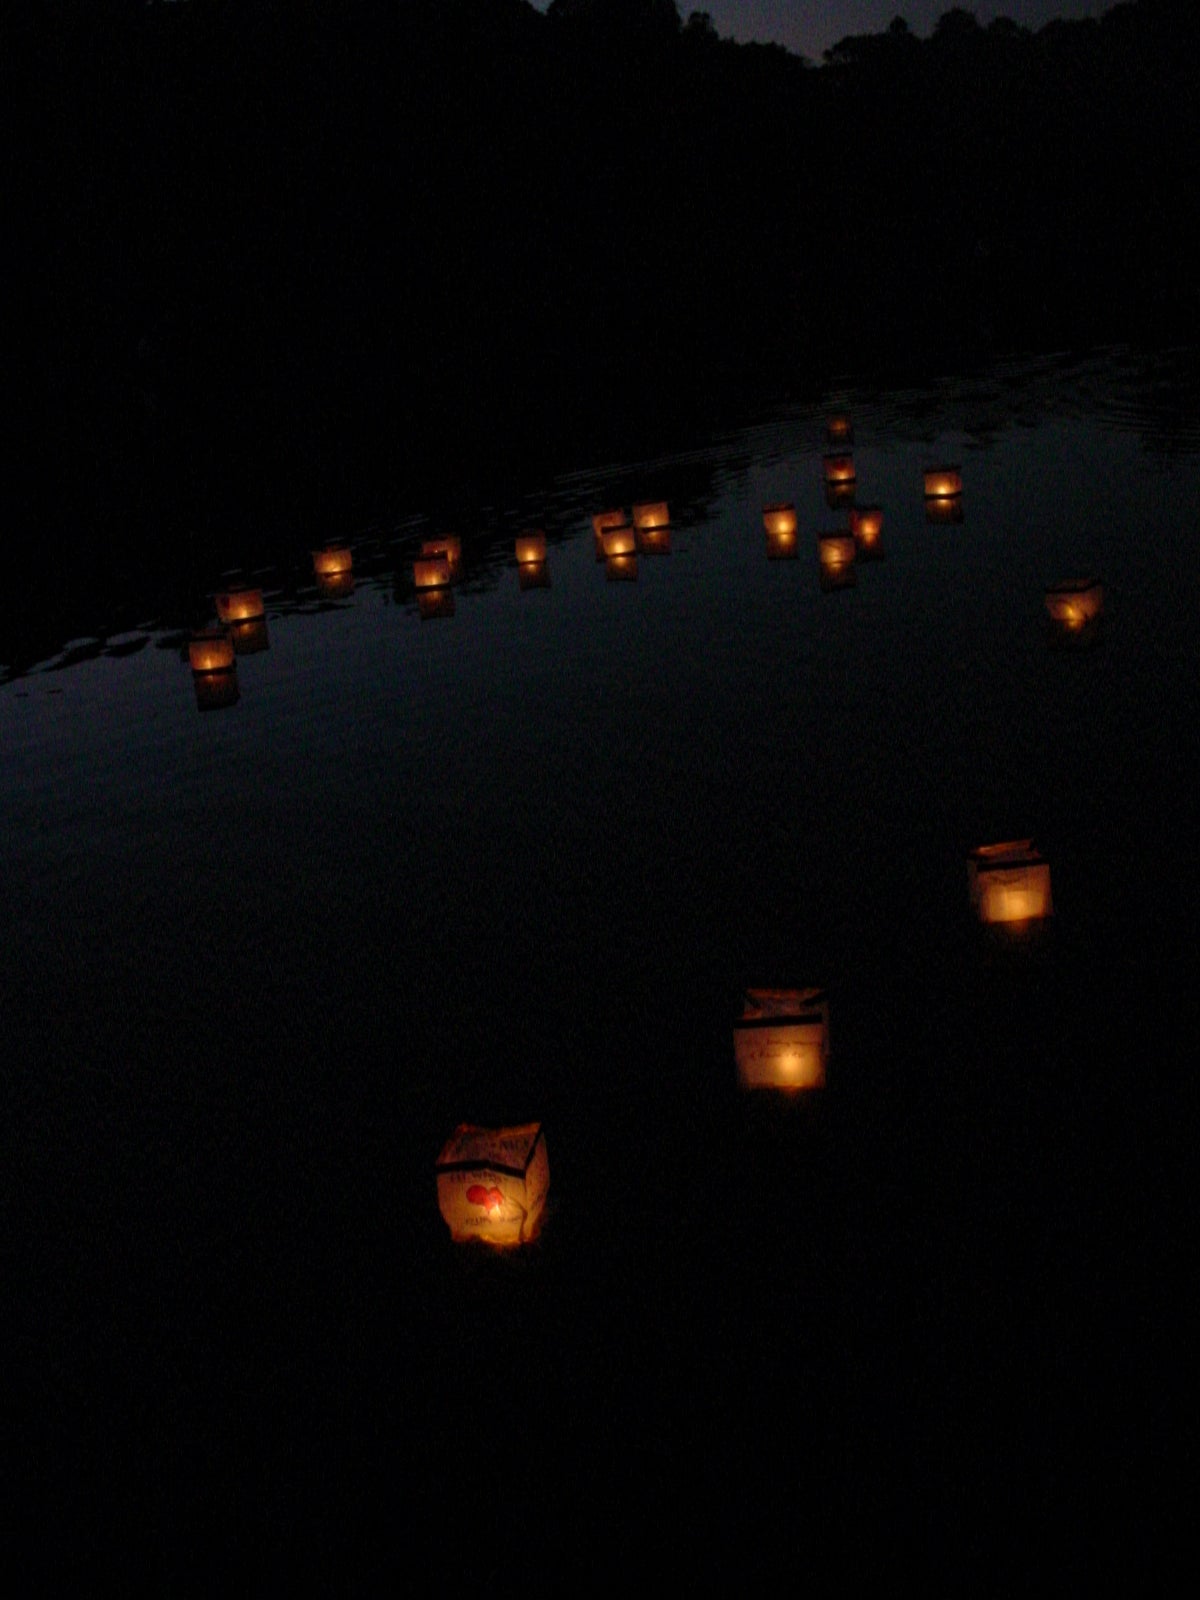 the memorial lanterns floating in the lake